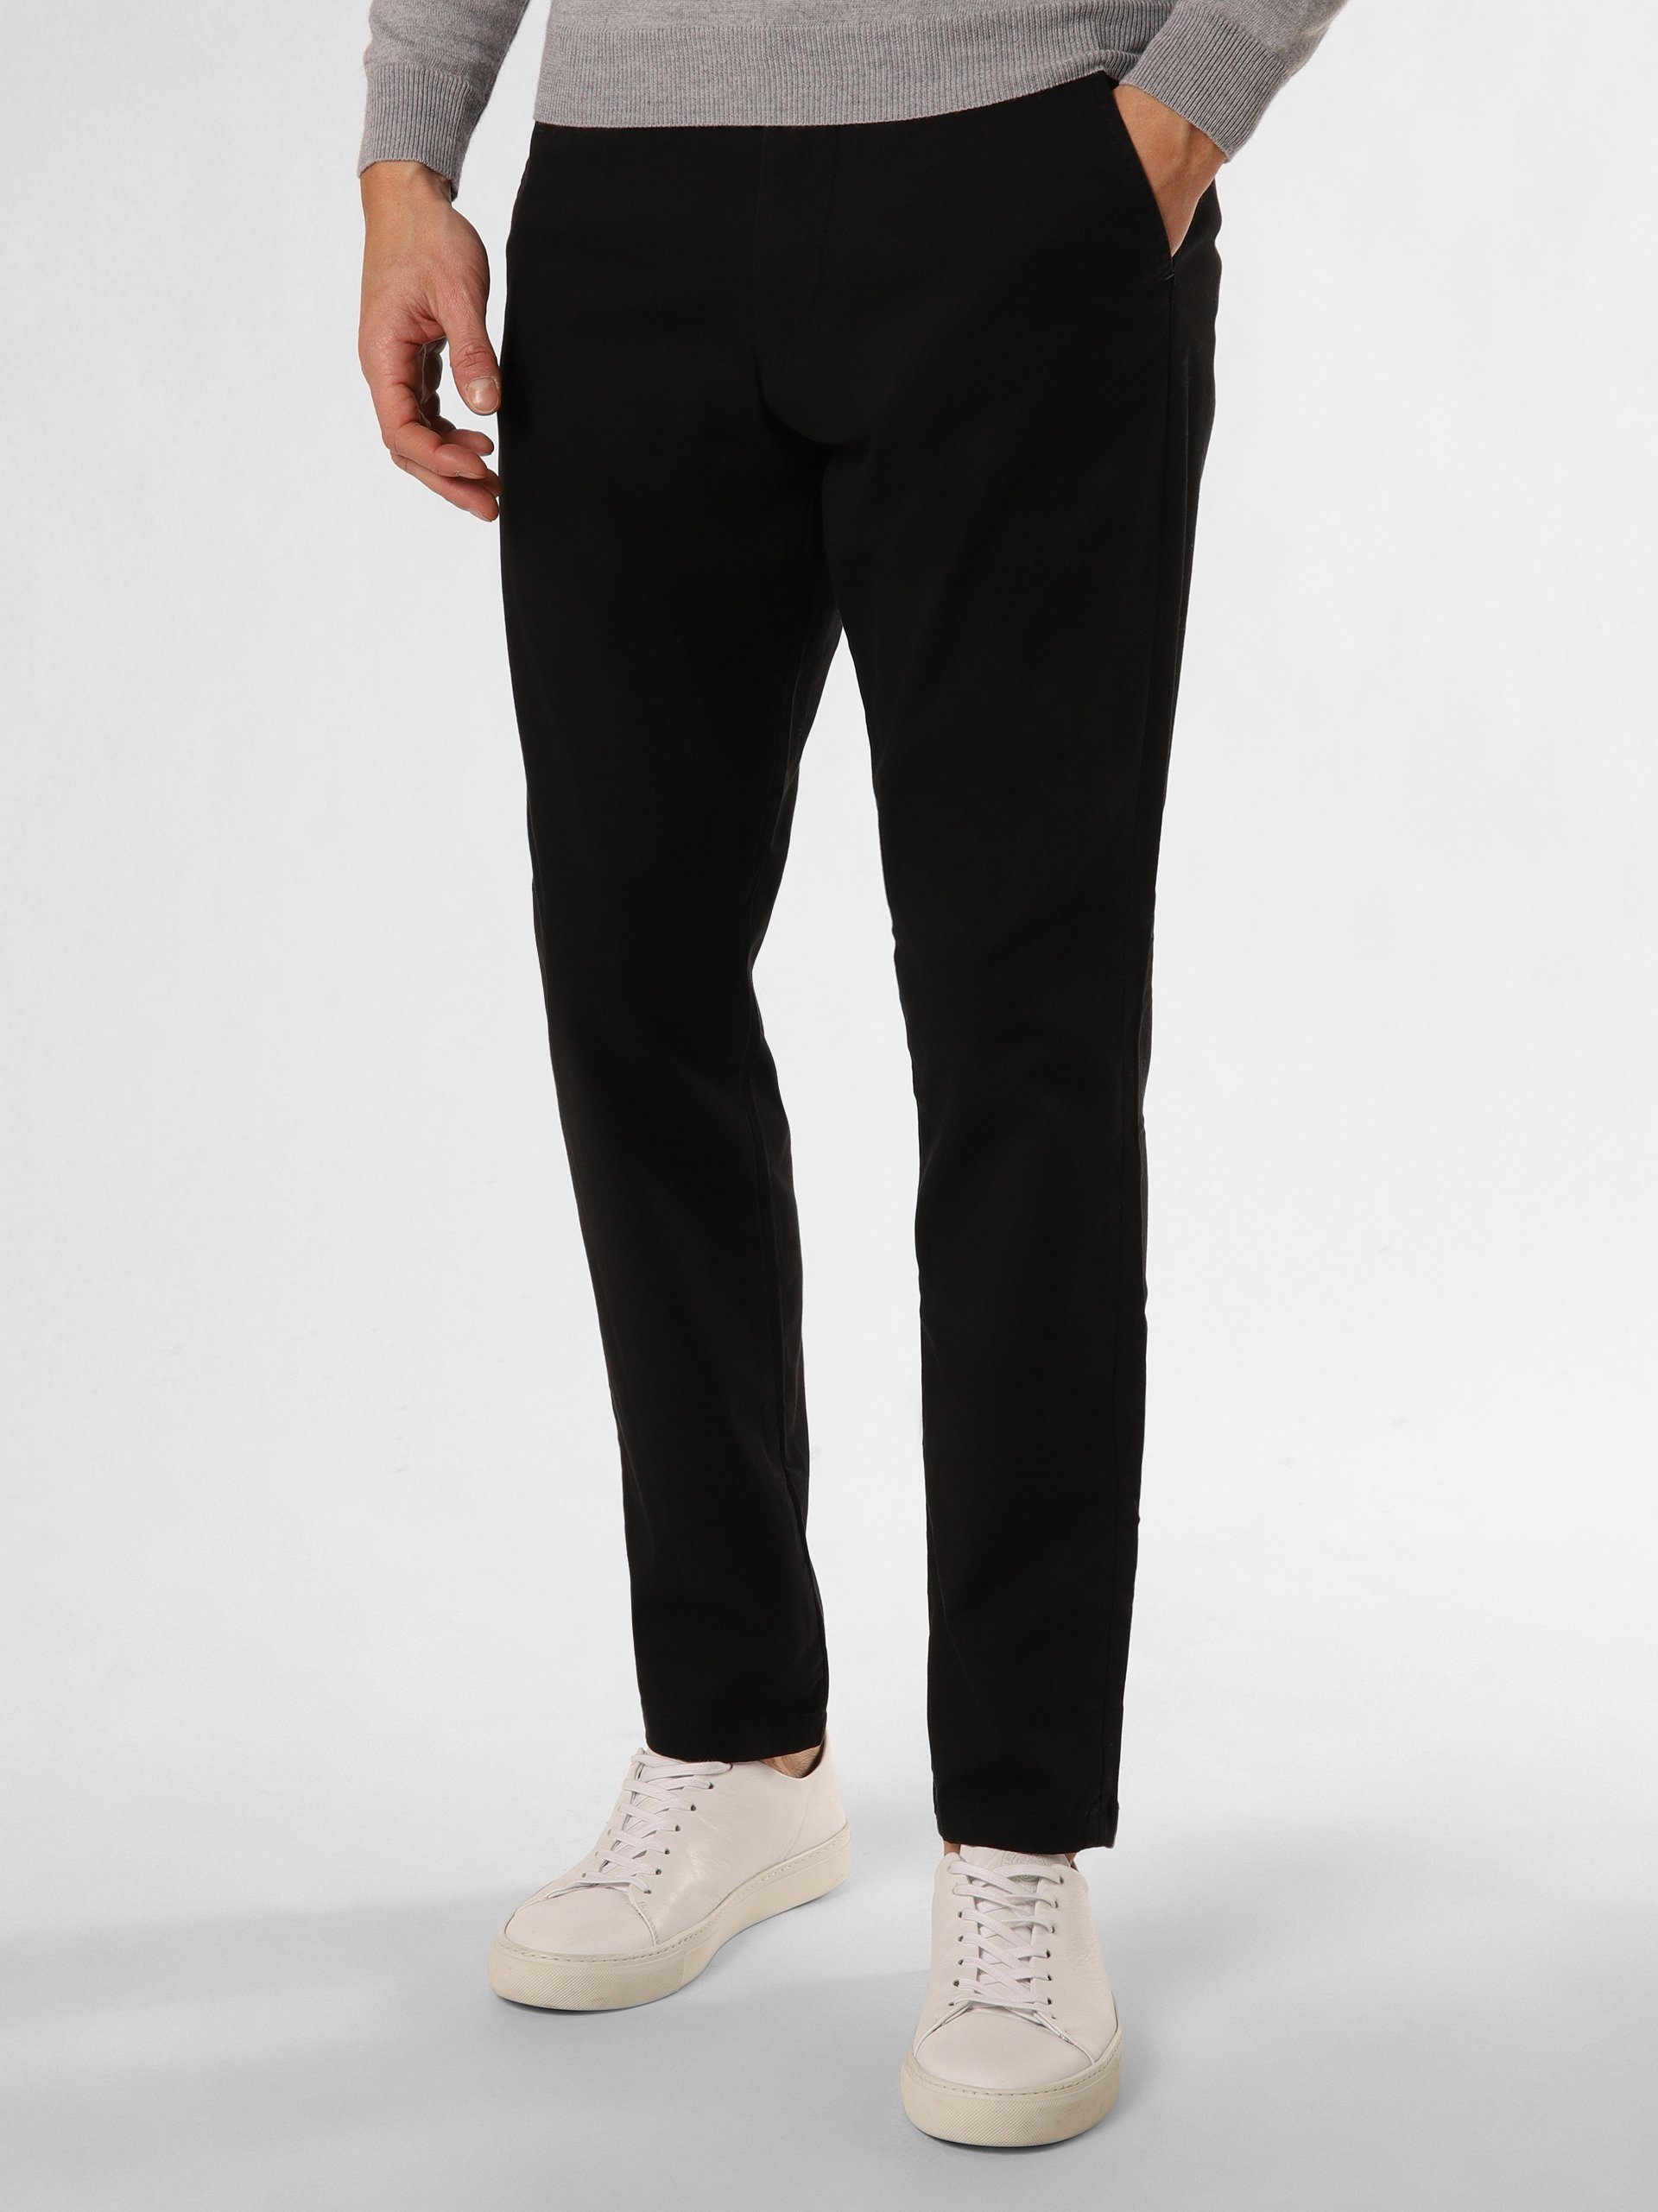 HOMME SELECTED schwarz SLHSlim-Miles Stoffhose